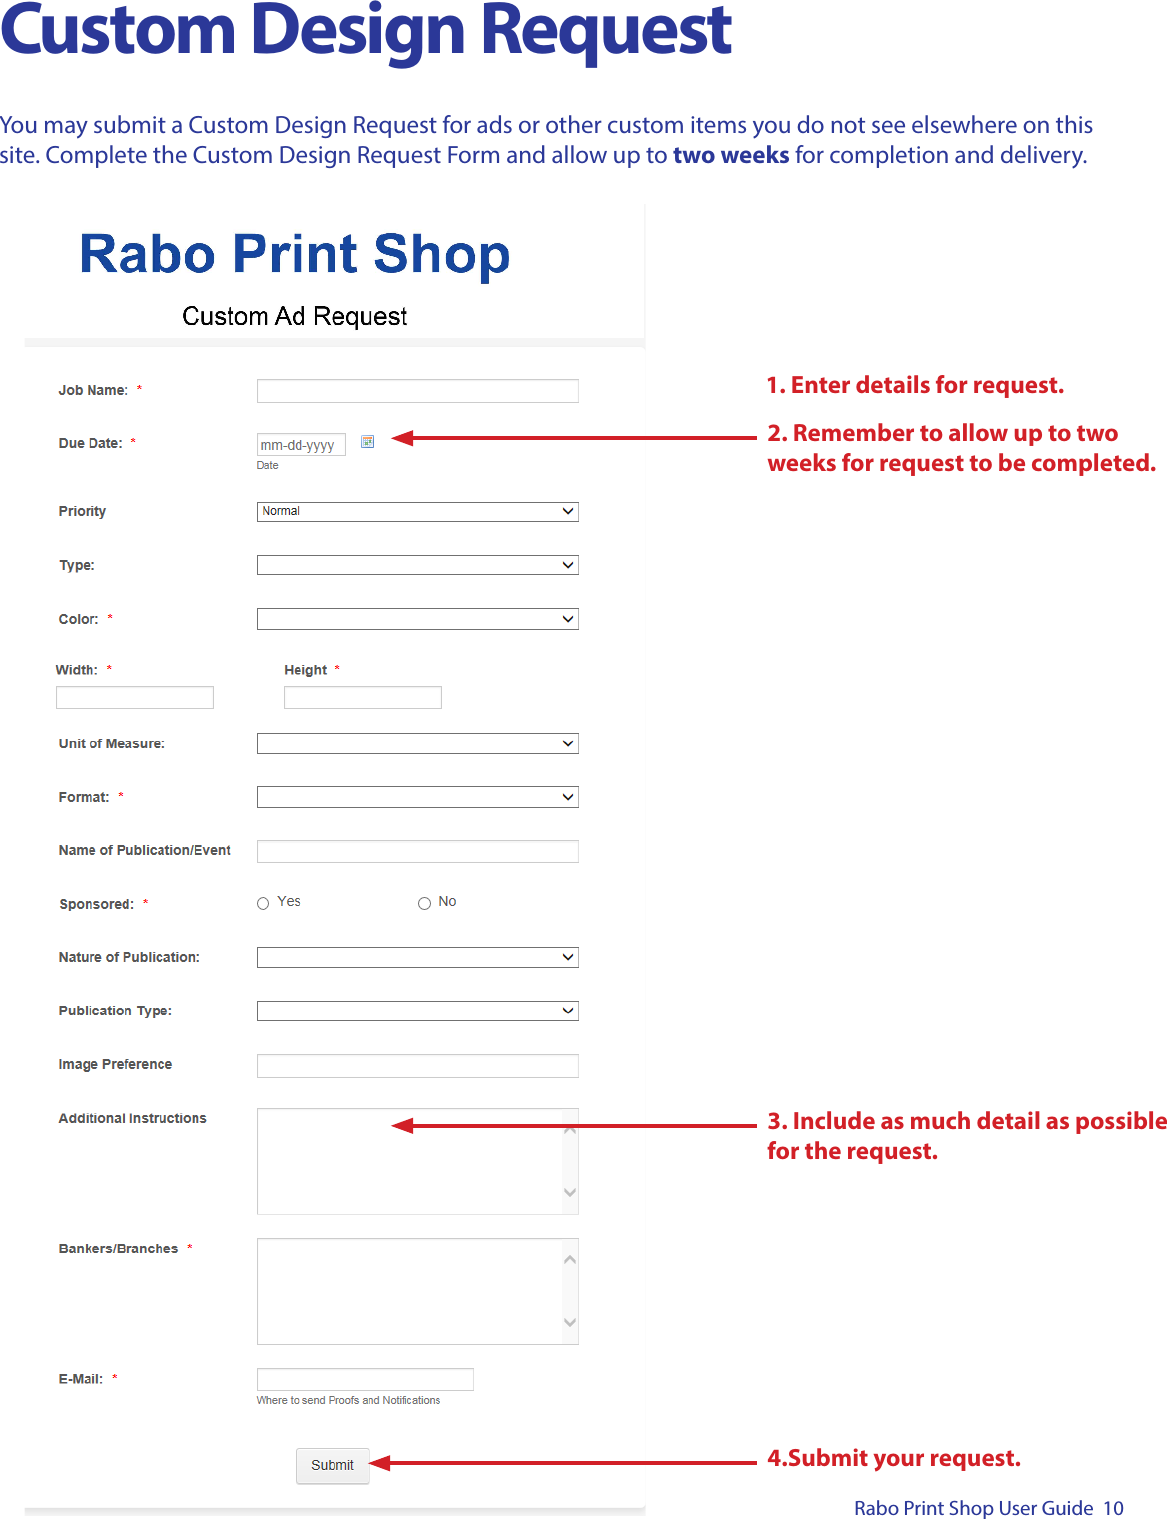 Page 10 of 10 - Rabo Print Shop User Guide